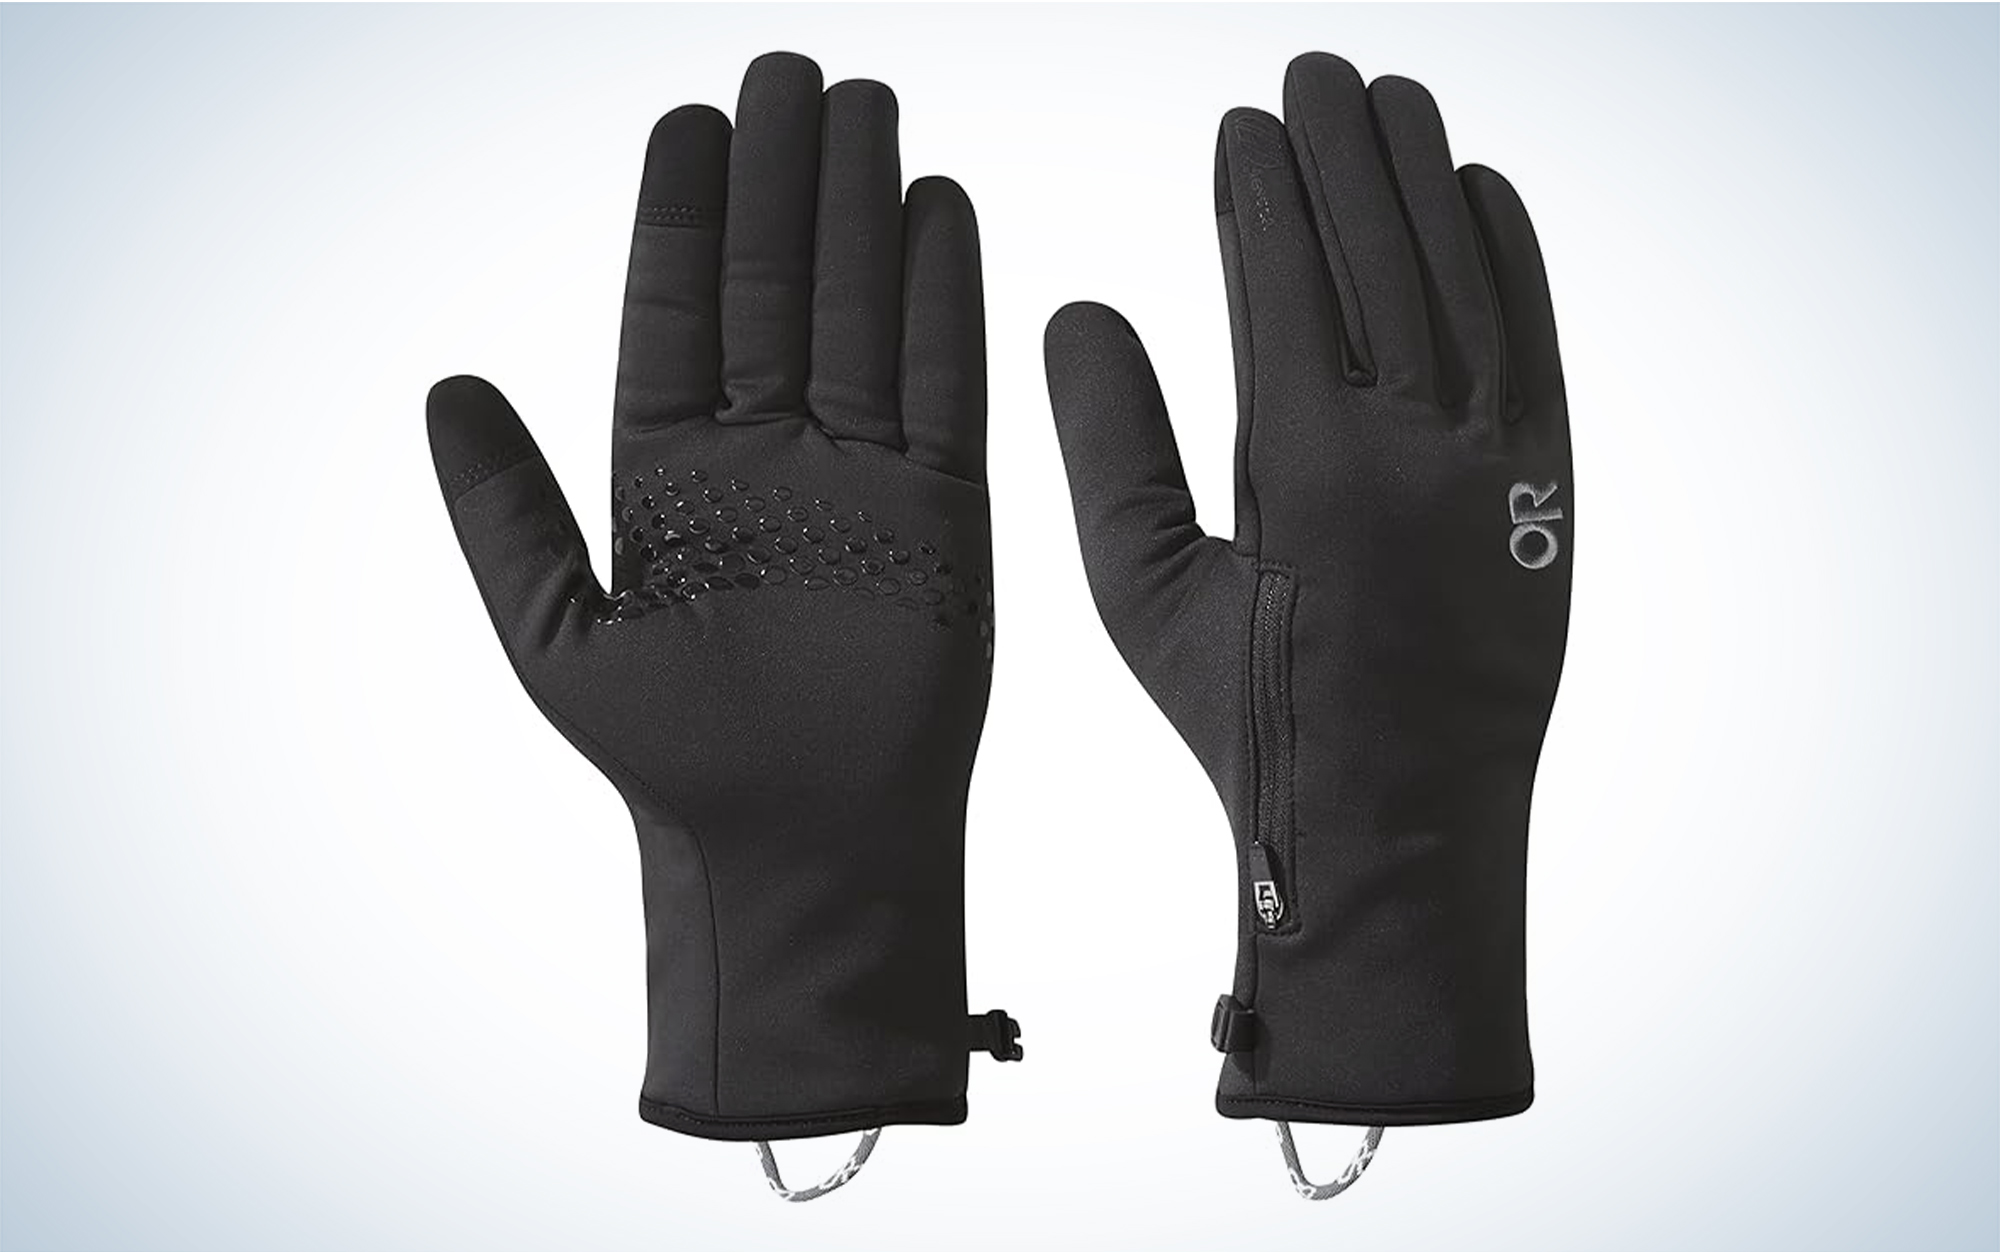 Slim, fitted Versaliner Sensor Gloves in black against a white and gray gradient background.